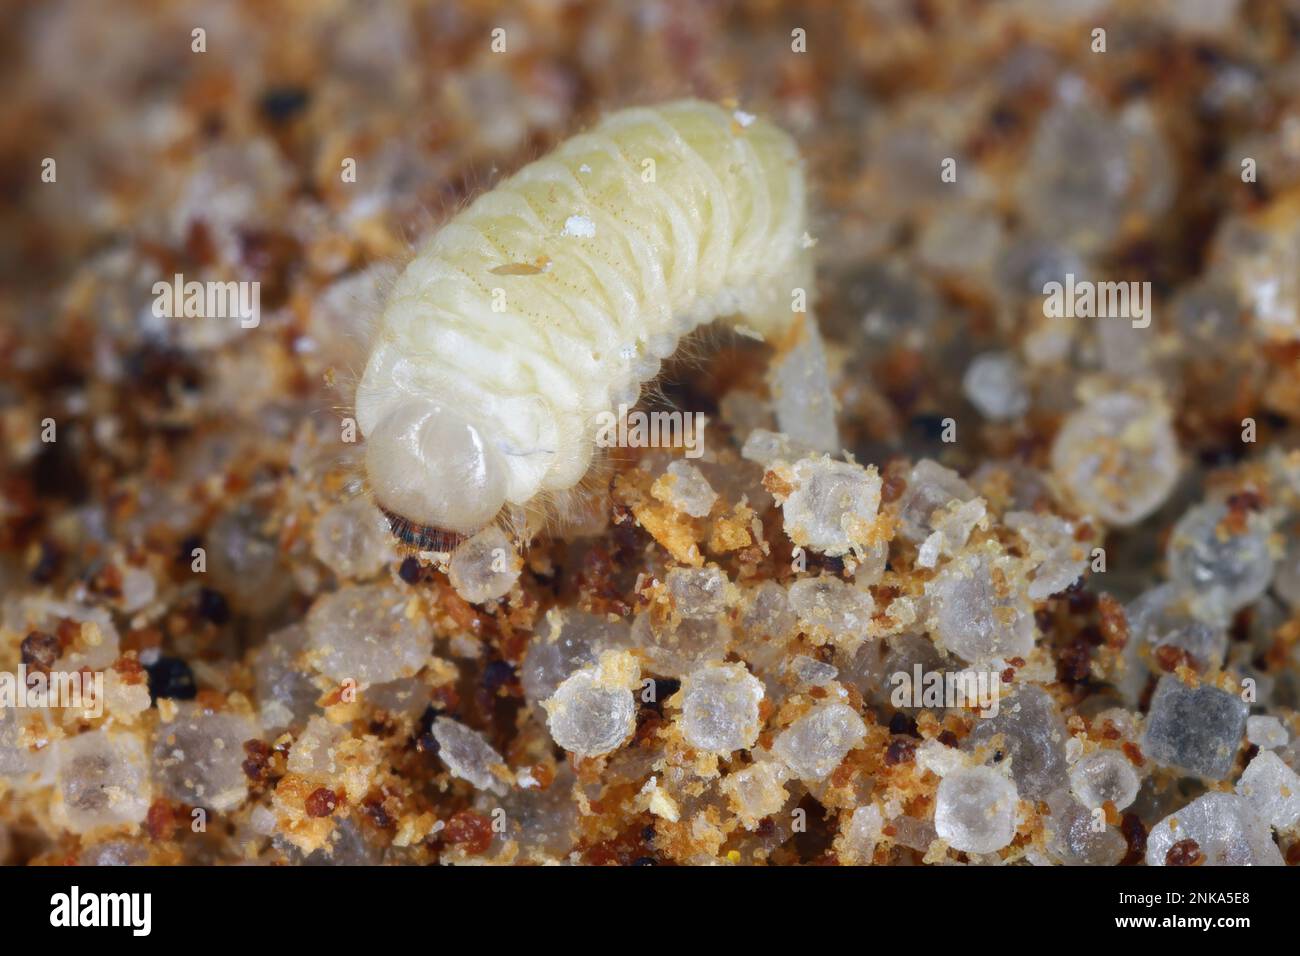 Biscuit, drugstore or bread beetle (Stegobium paniceum) larva stored product pest in the spices. Stock Photo